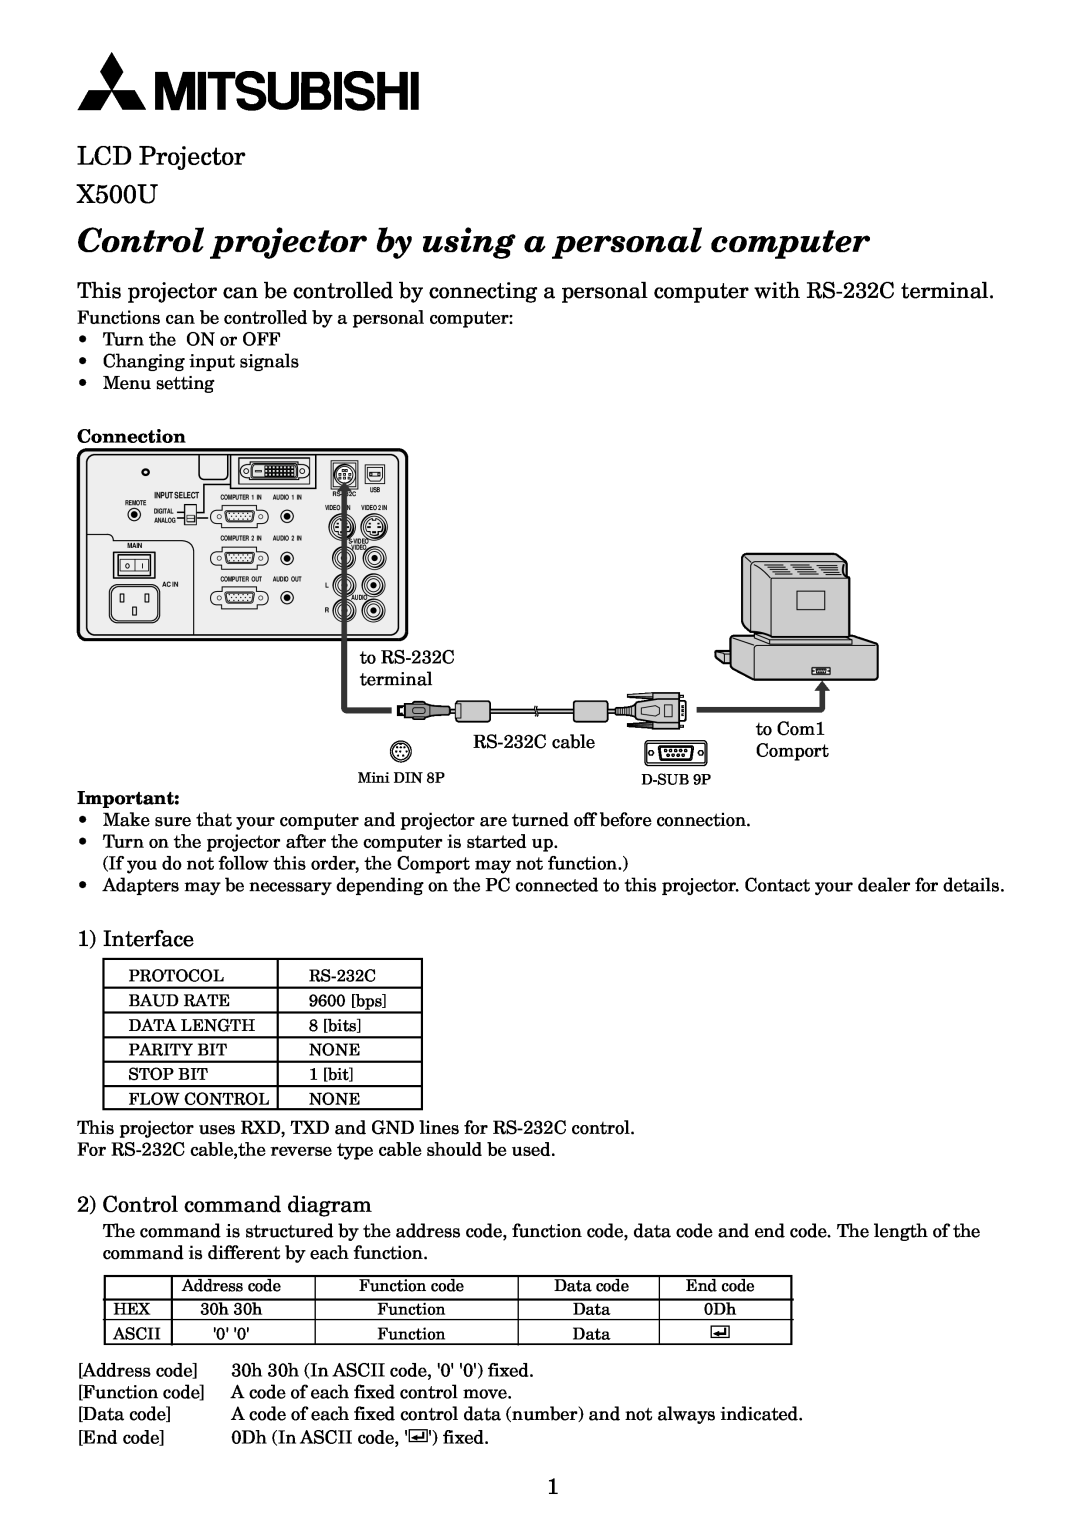 Mitsubishi Electronics user manual Control projector by using a personal computer, LCD Projector X500U, Connection 